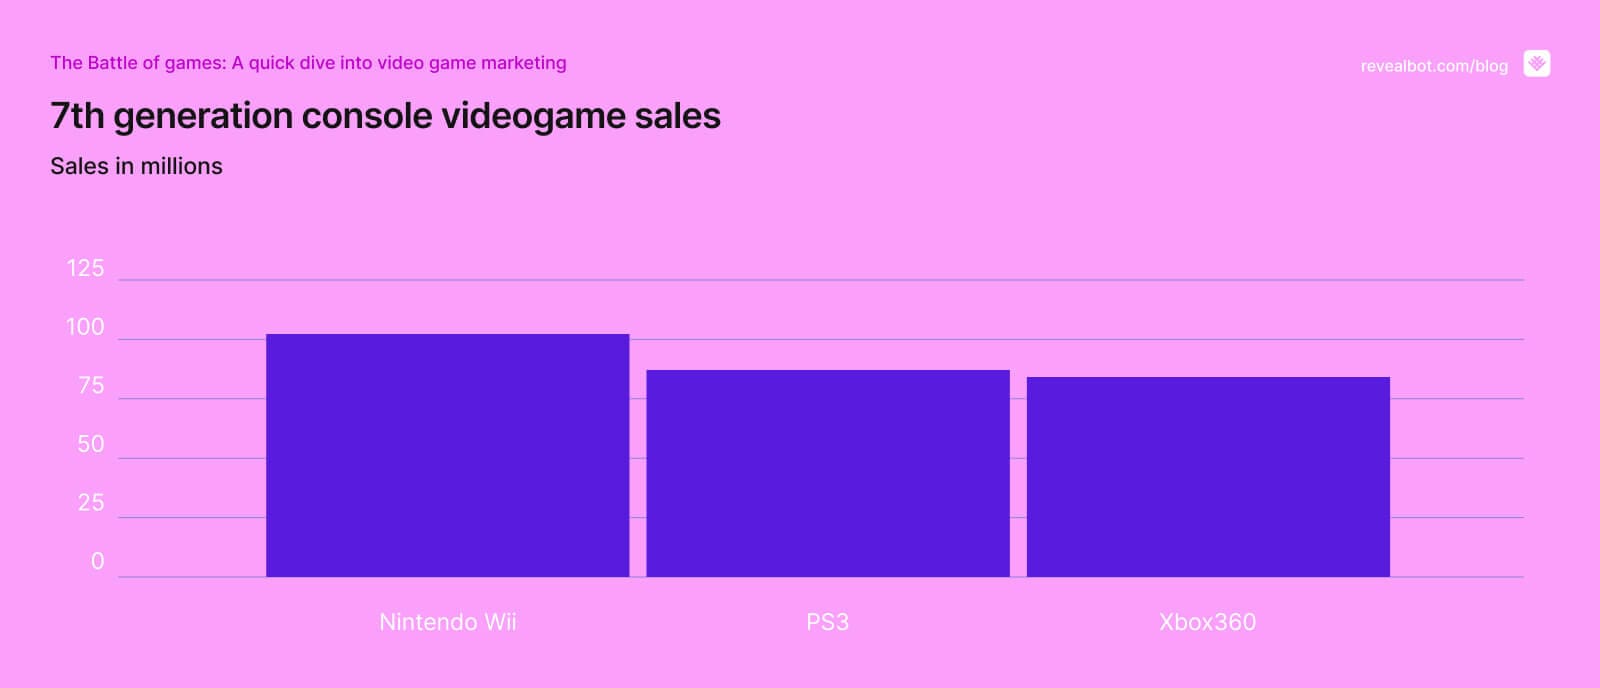 7th generation console videogame sales